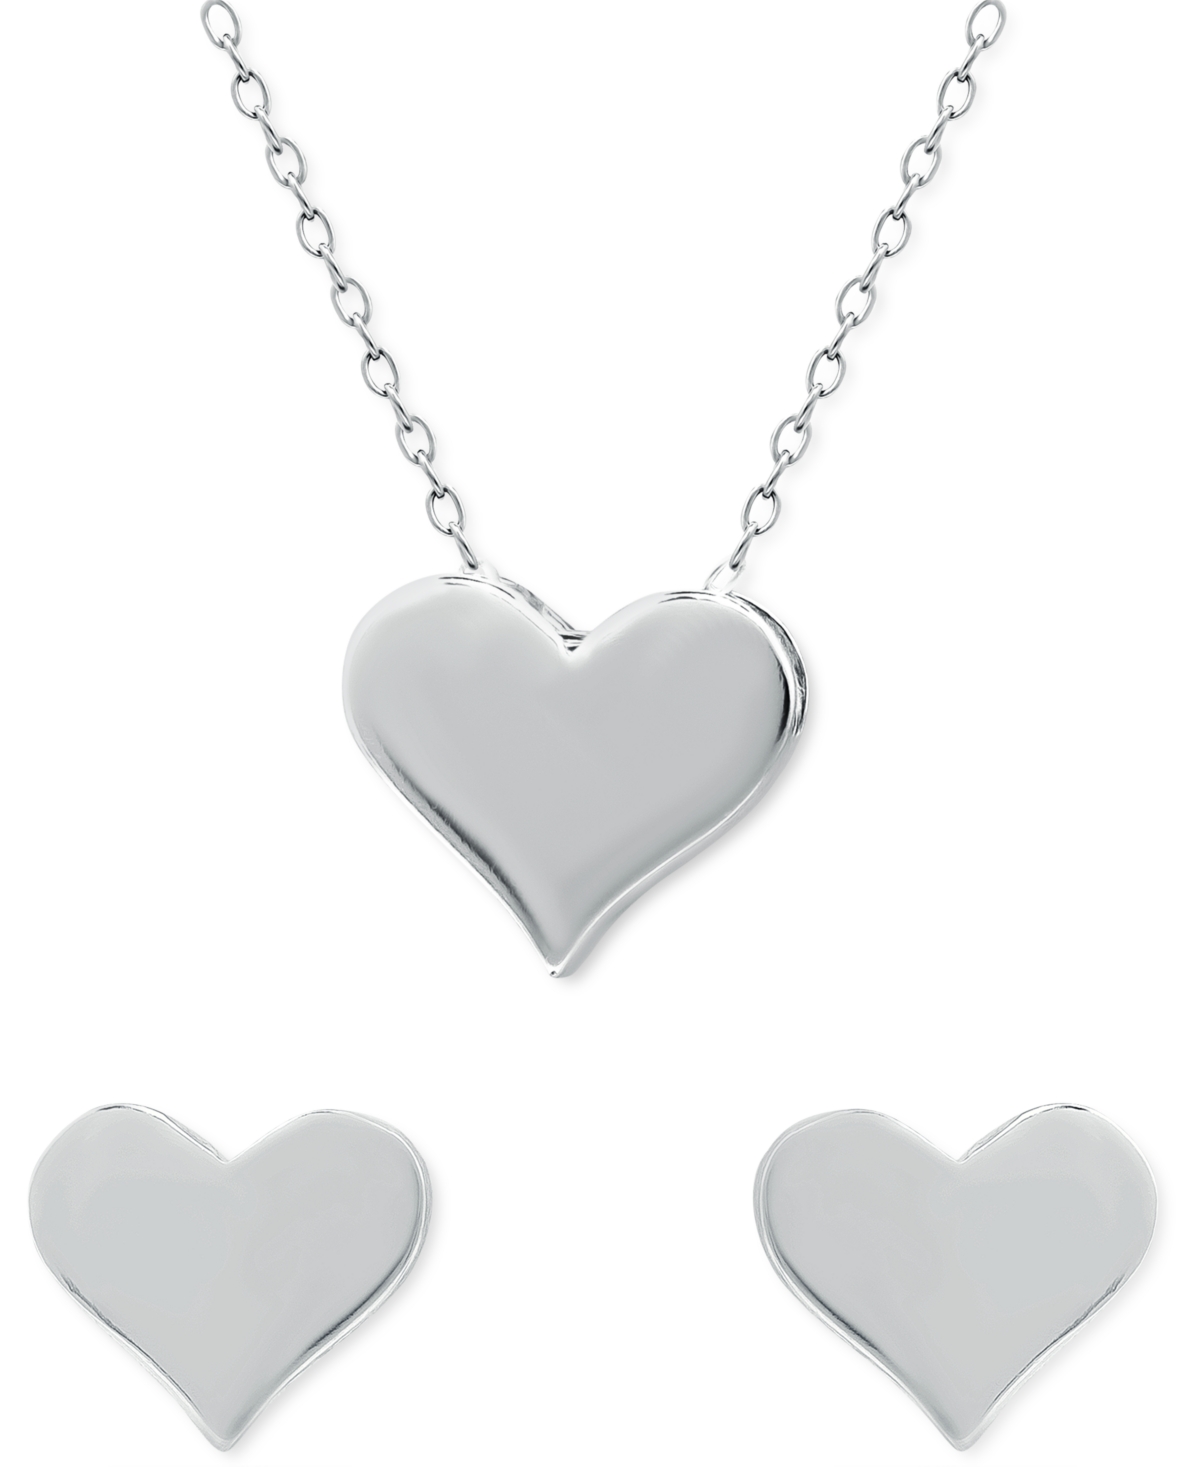 Giani Bernini 2-pc. Set Polished Heart Pendant Necklace & Matching Stud Earrings, Created For Macy's In Sterling Silver